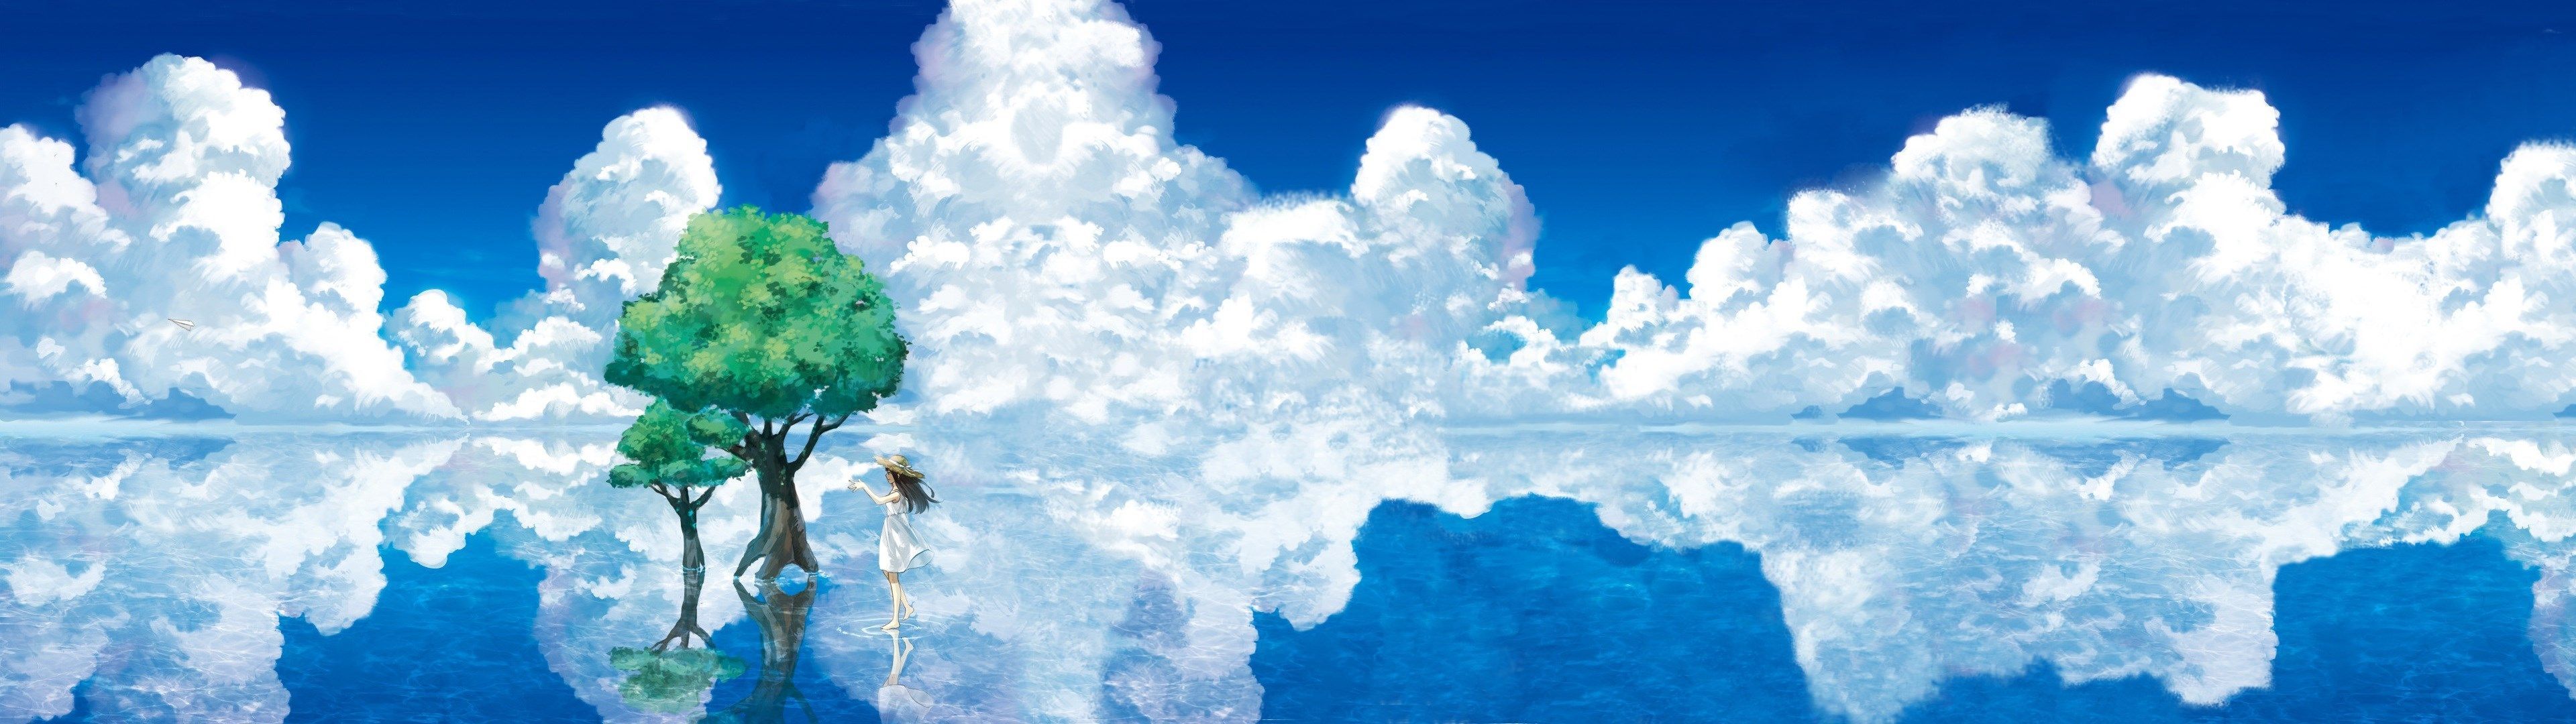 3840x1080 Anime Wallpapers Wallpaper Cave